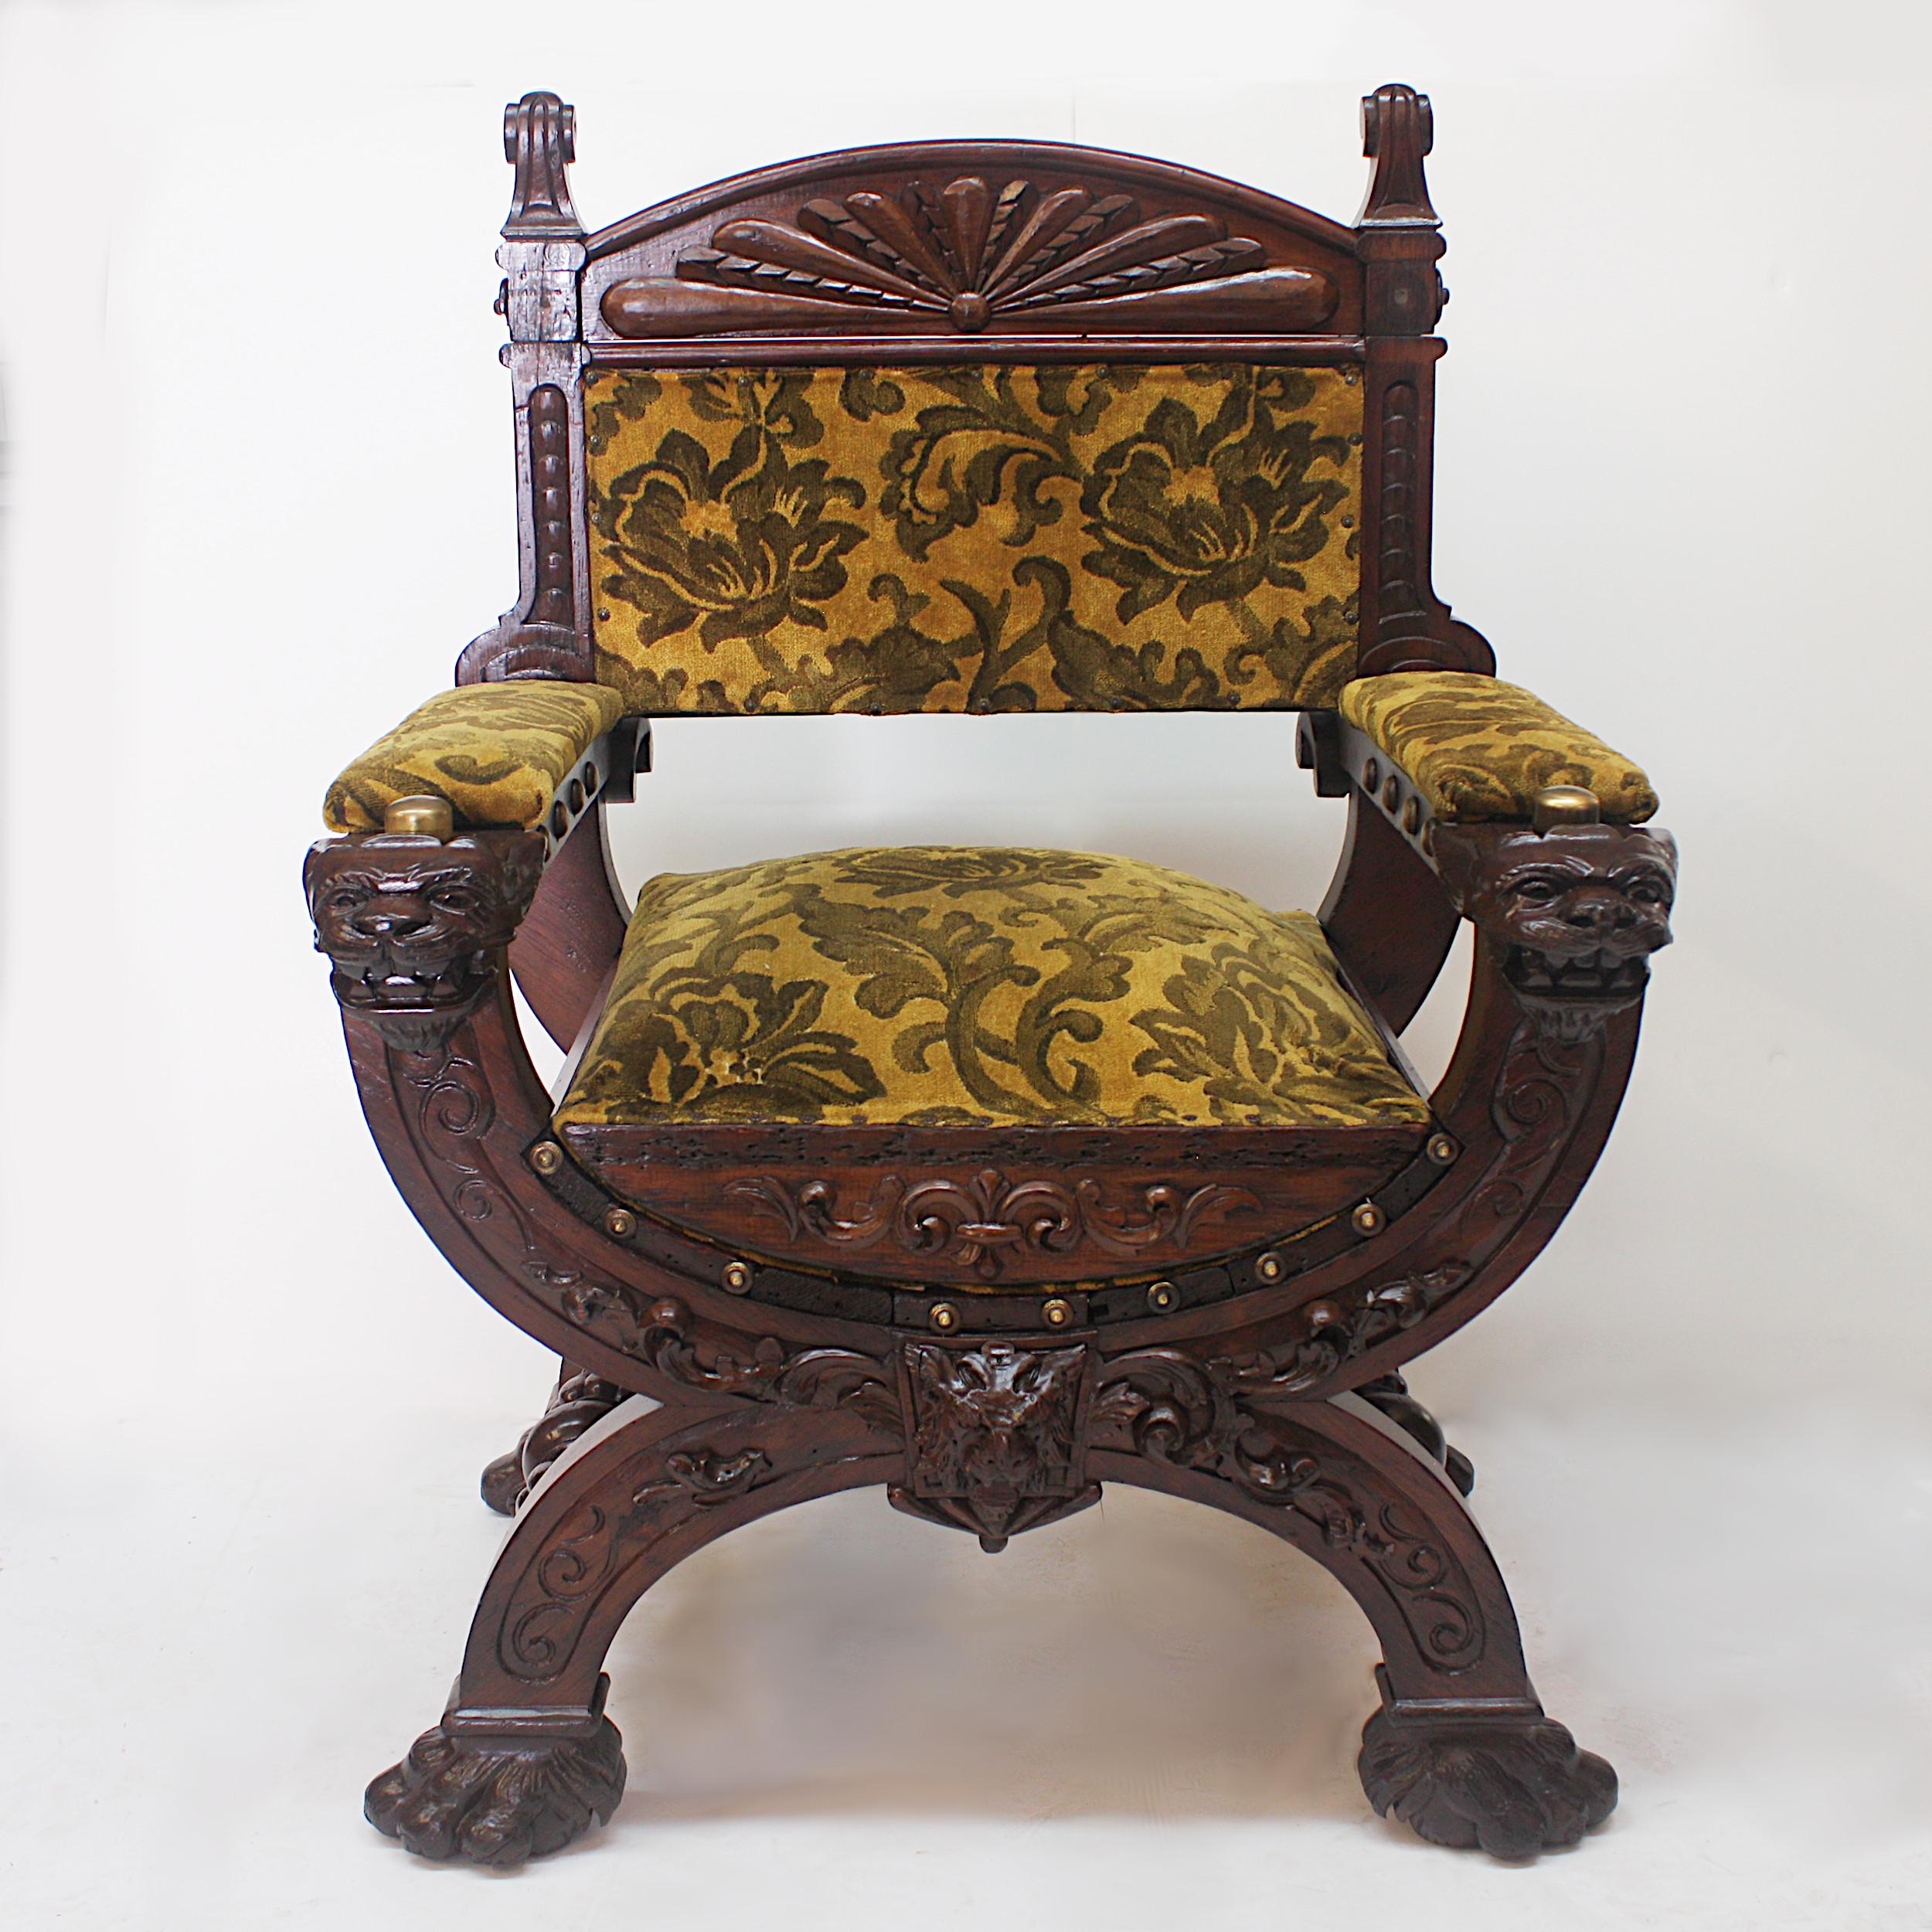 Carved Unusual Early 20th Century Photographer's Posing Chair with Ornate Carving For Sale